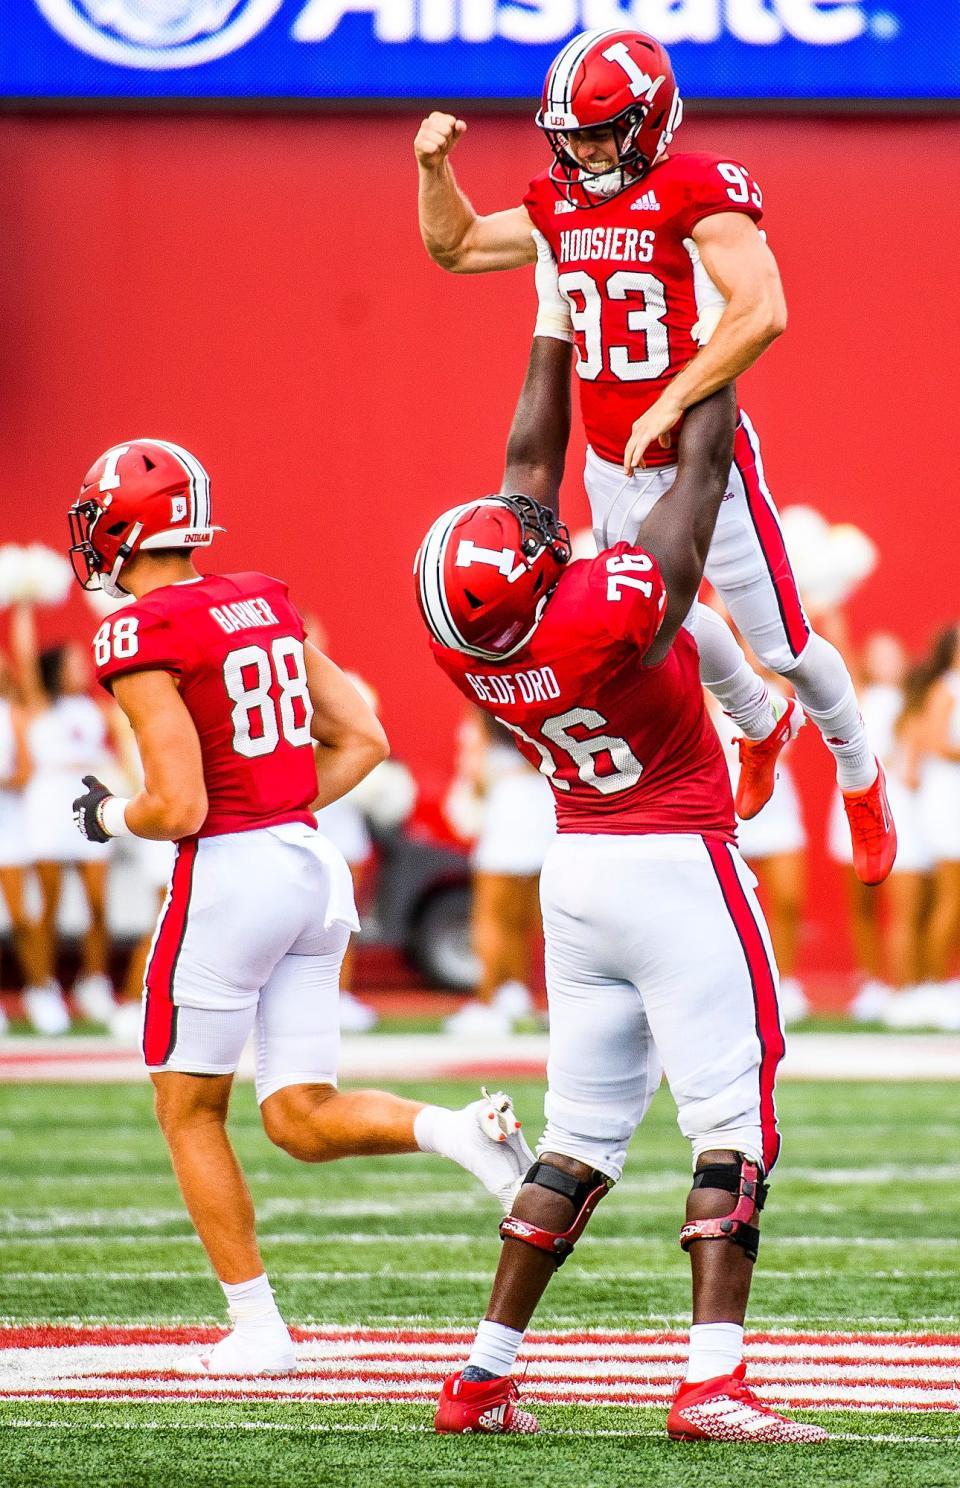 Indiana's Charles Campbell (93) is hoisted up by Matthew Bedford (76) after making a 48 yard field goal during the second half of the Indiana versus Cincinnati football game at Memorial Stadium on Saturday, September 18, 2021.